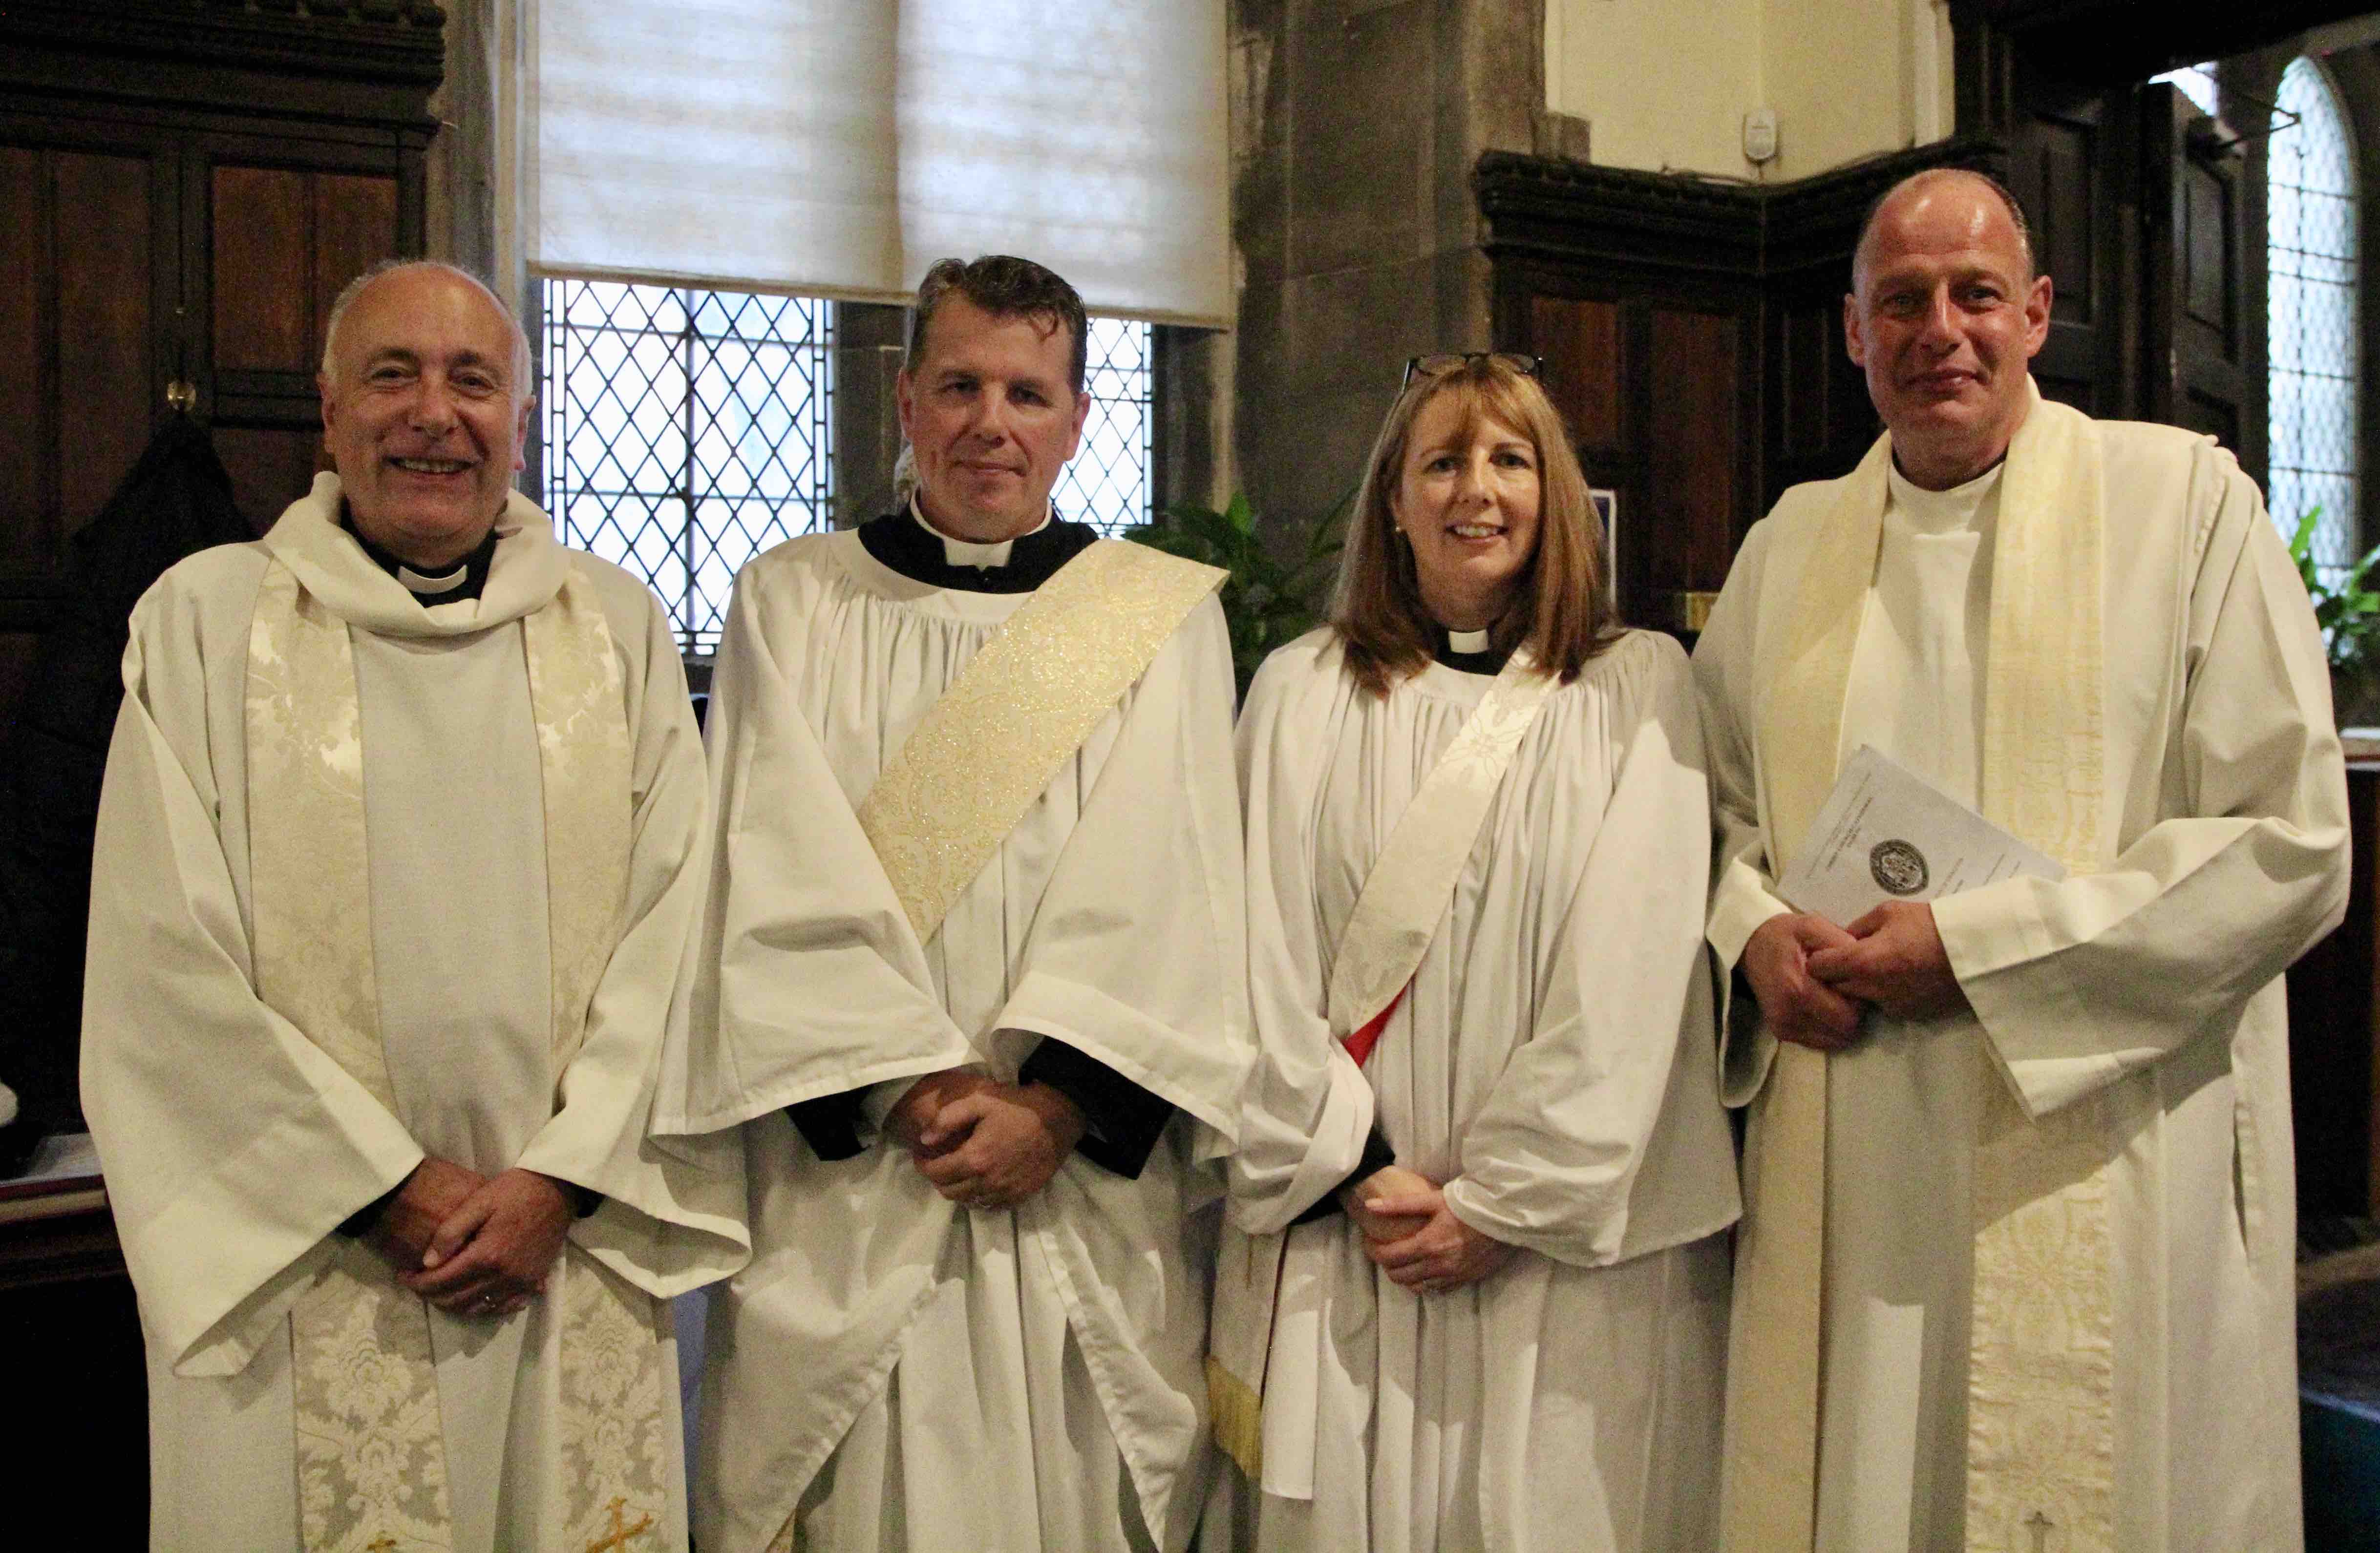 The Revd Mathew McCauley and the Revd Caroline Brennan (centre) with the Rectors of Irishtown and Donnybrook and Monkstown, Canon Leonard Ruddock and Canon Roy Byrne, with whom they will serve.